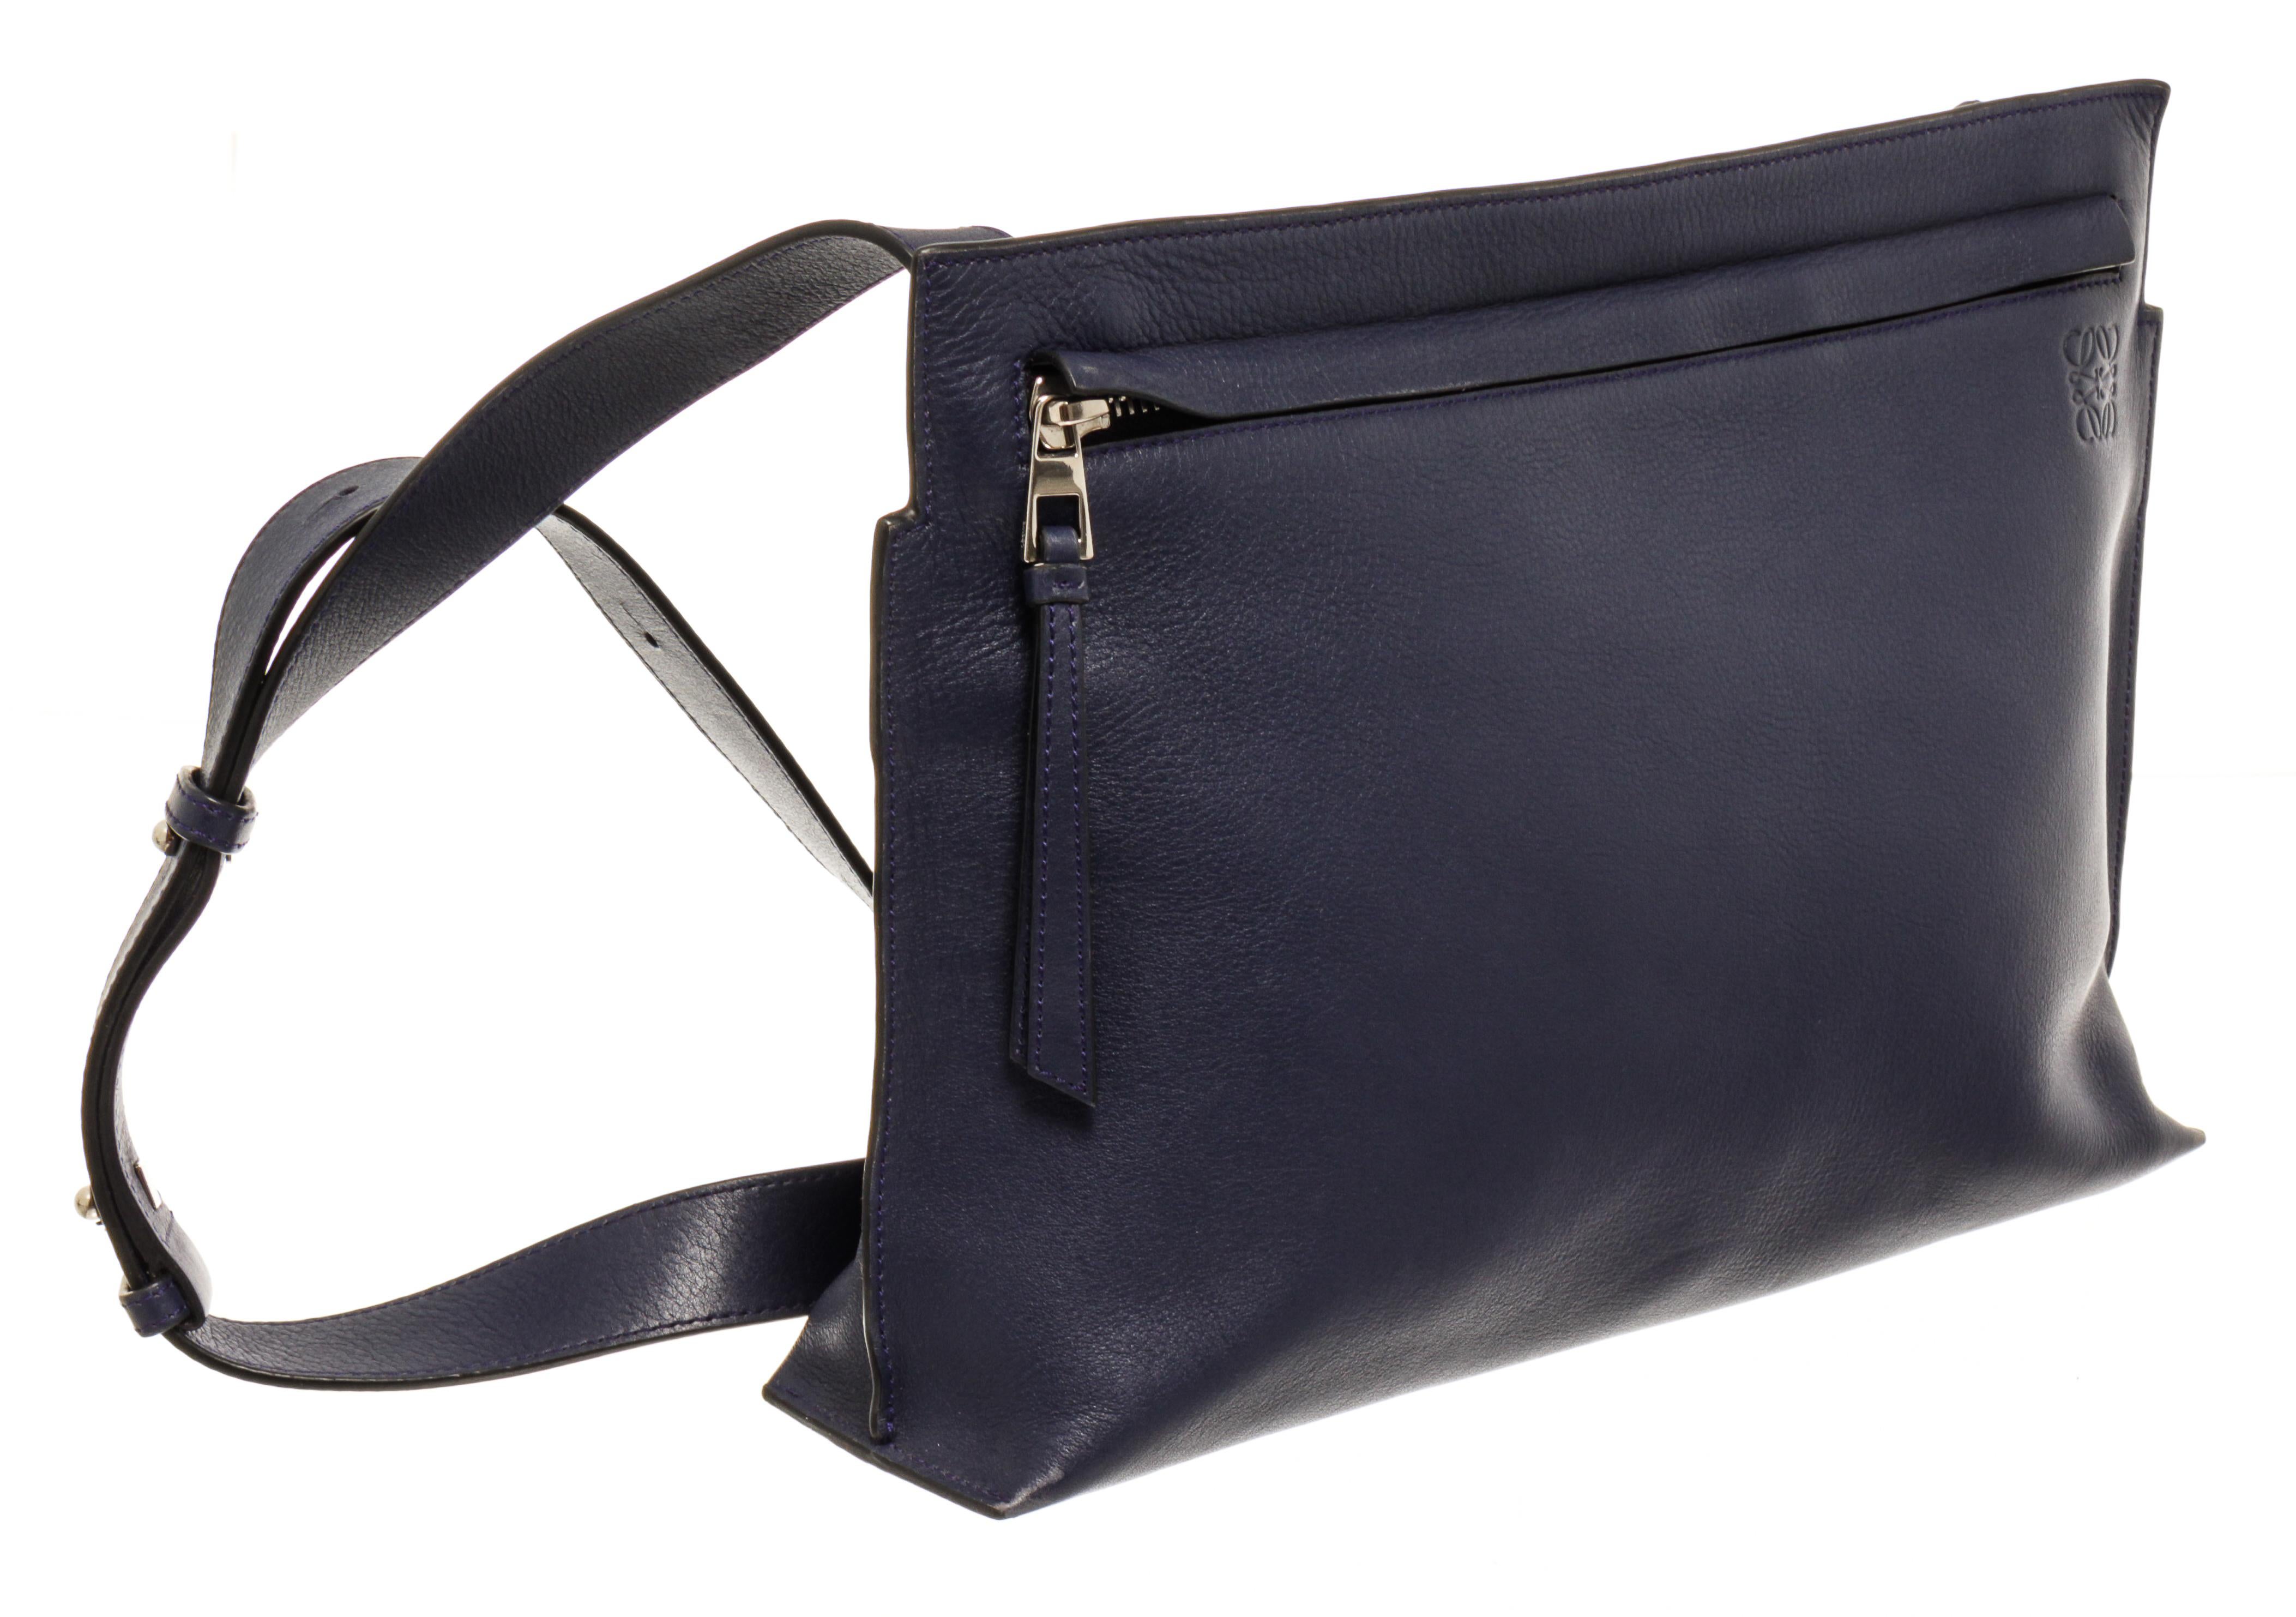 Loewe Navy Blue Leather T Messenger Bag with silver-tone hardware, Loewe embossed logo at the right front, black canvas lining, adjustable shoulder strap, and zipper closure at the top.

440223MSC.